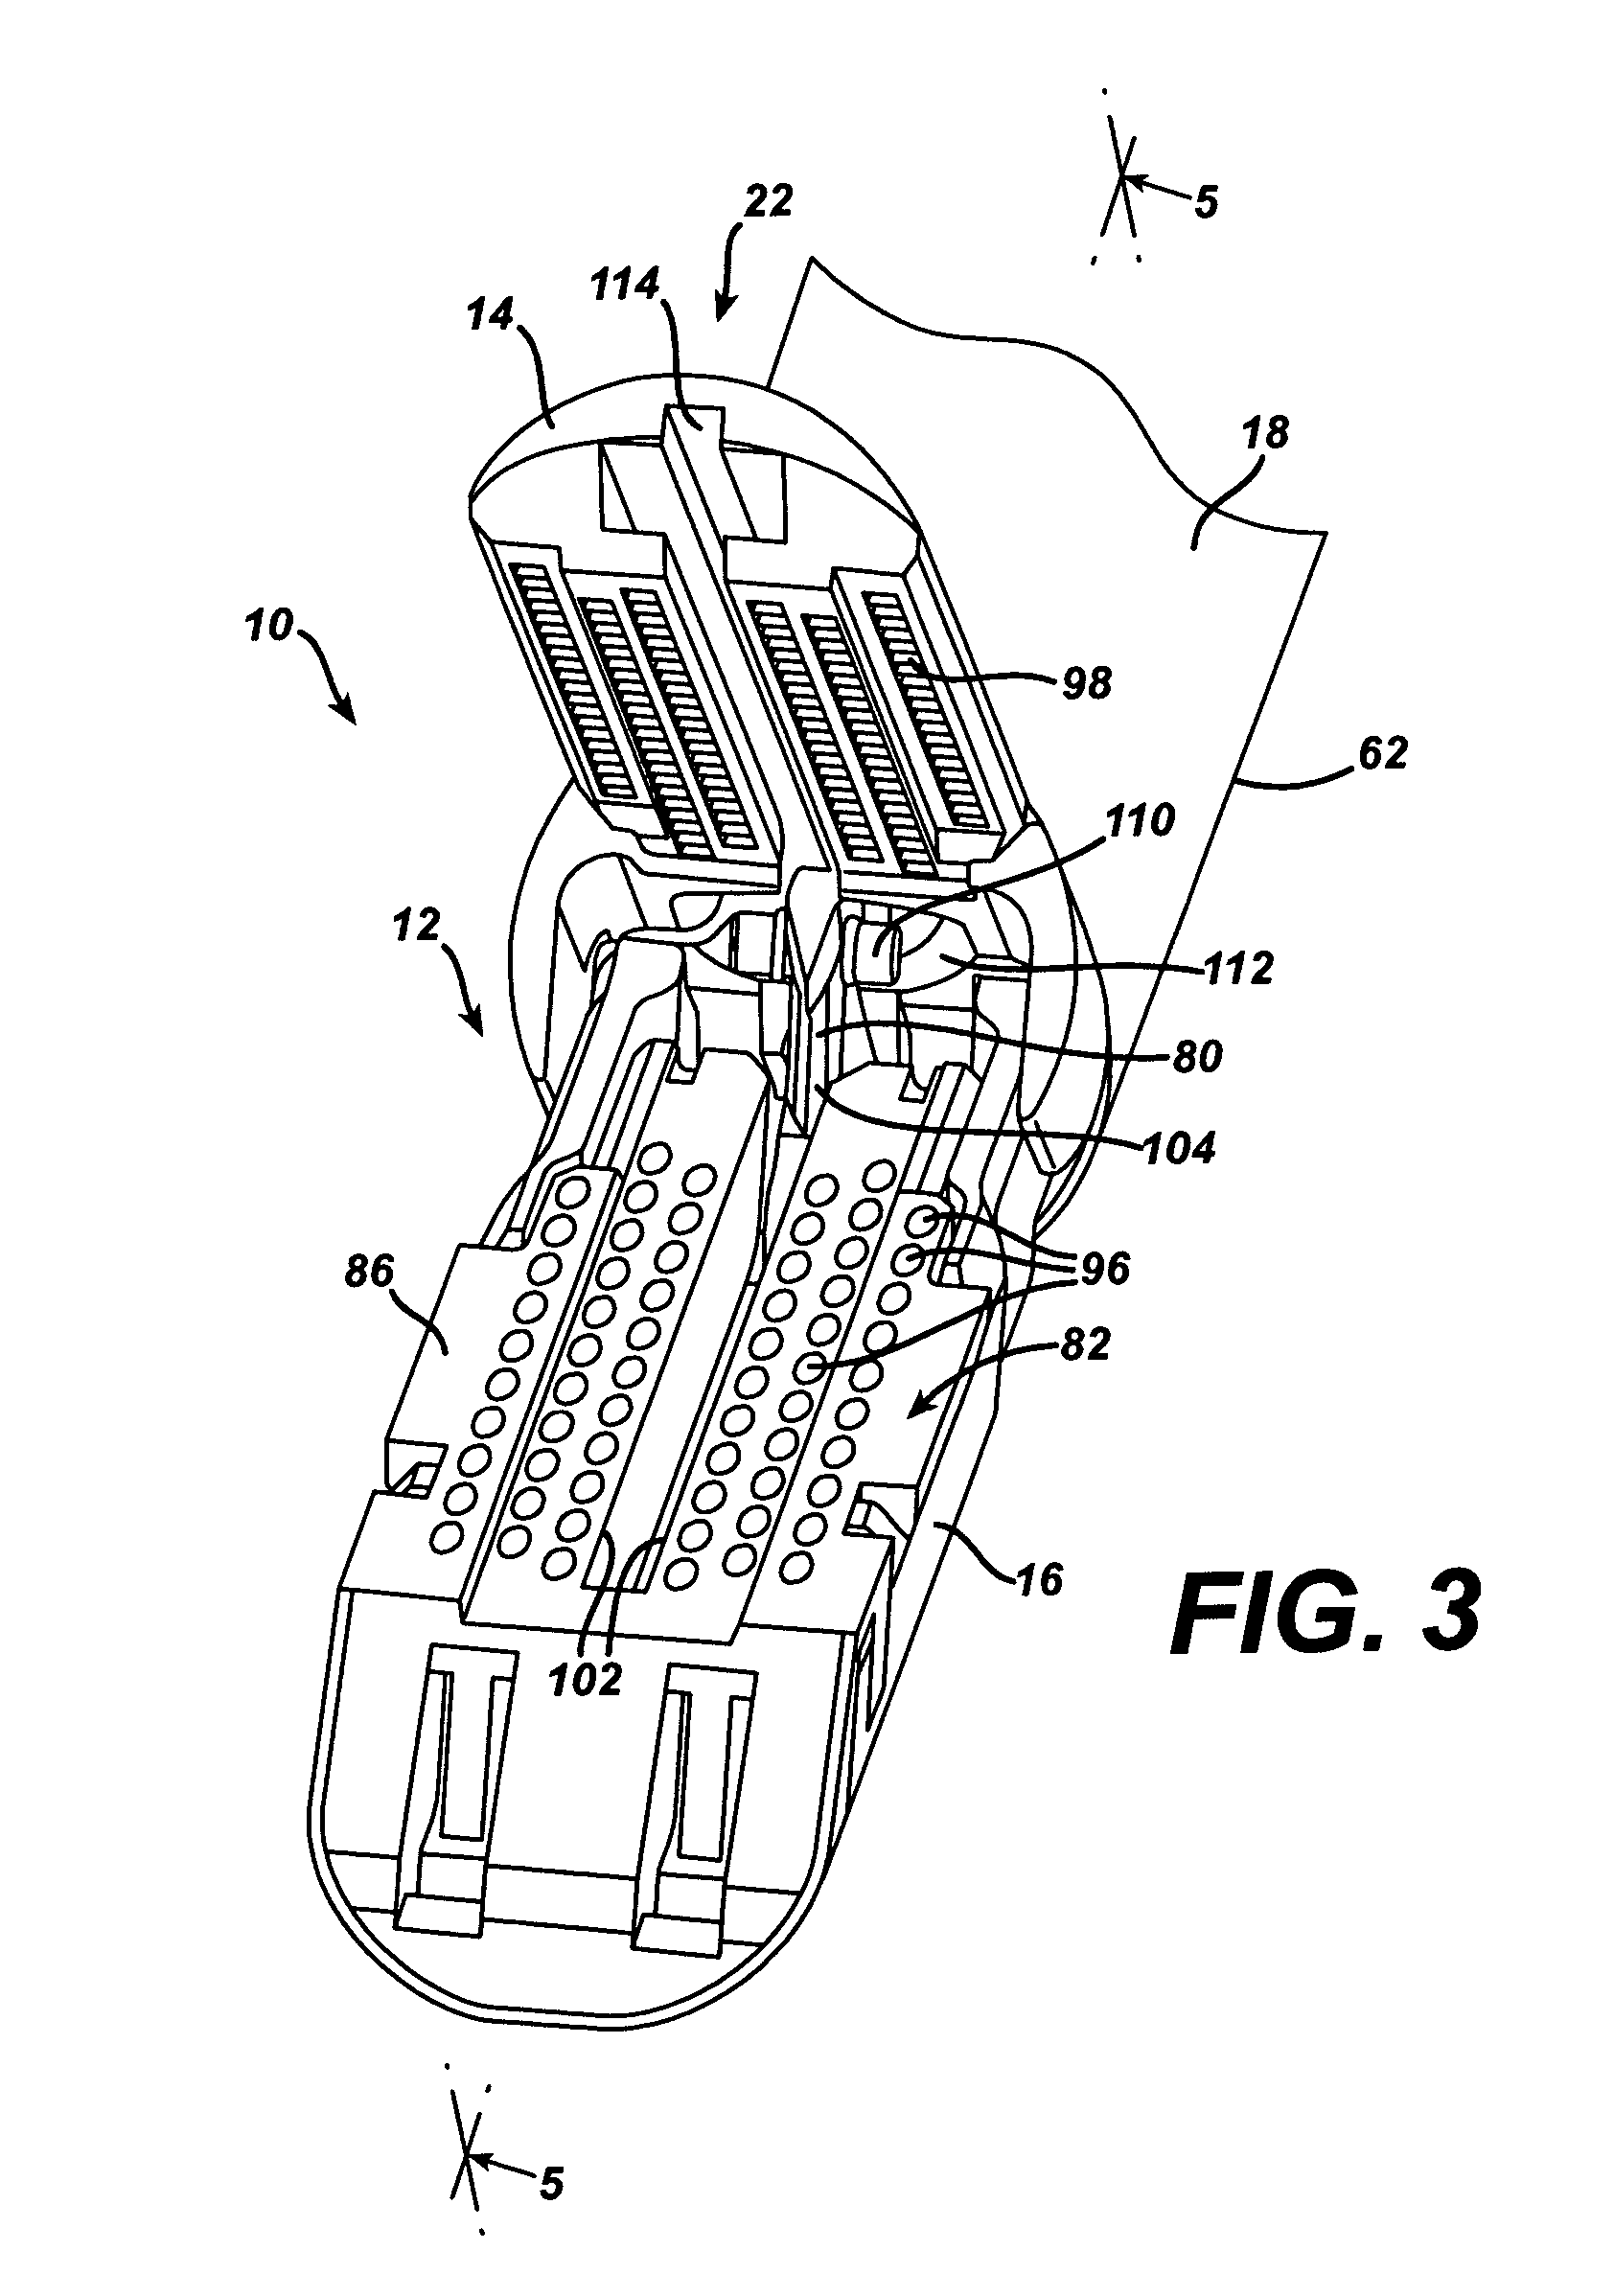 Surgical stapling instrument incorporating a multi-stroke firing mechanism with automatic end of firing travel retraction